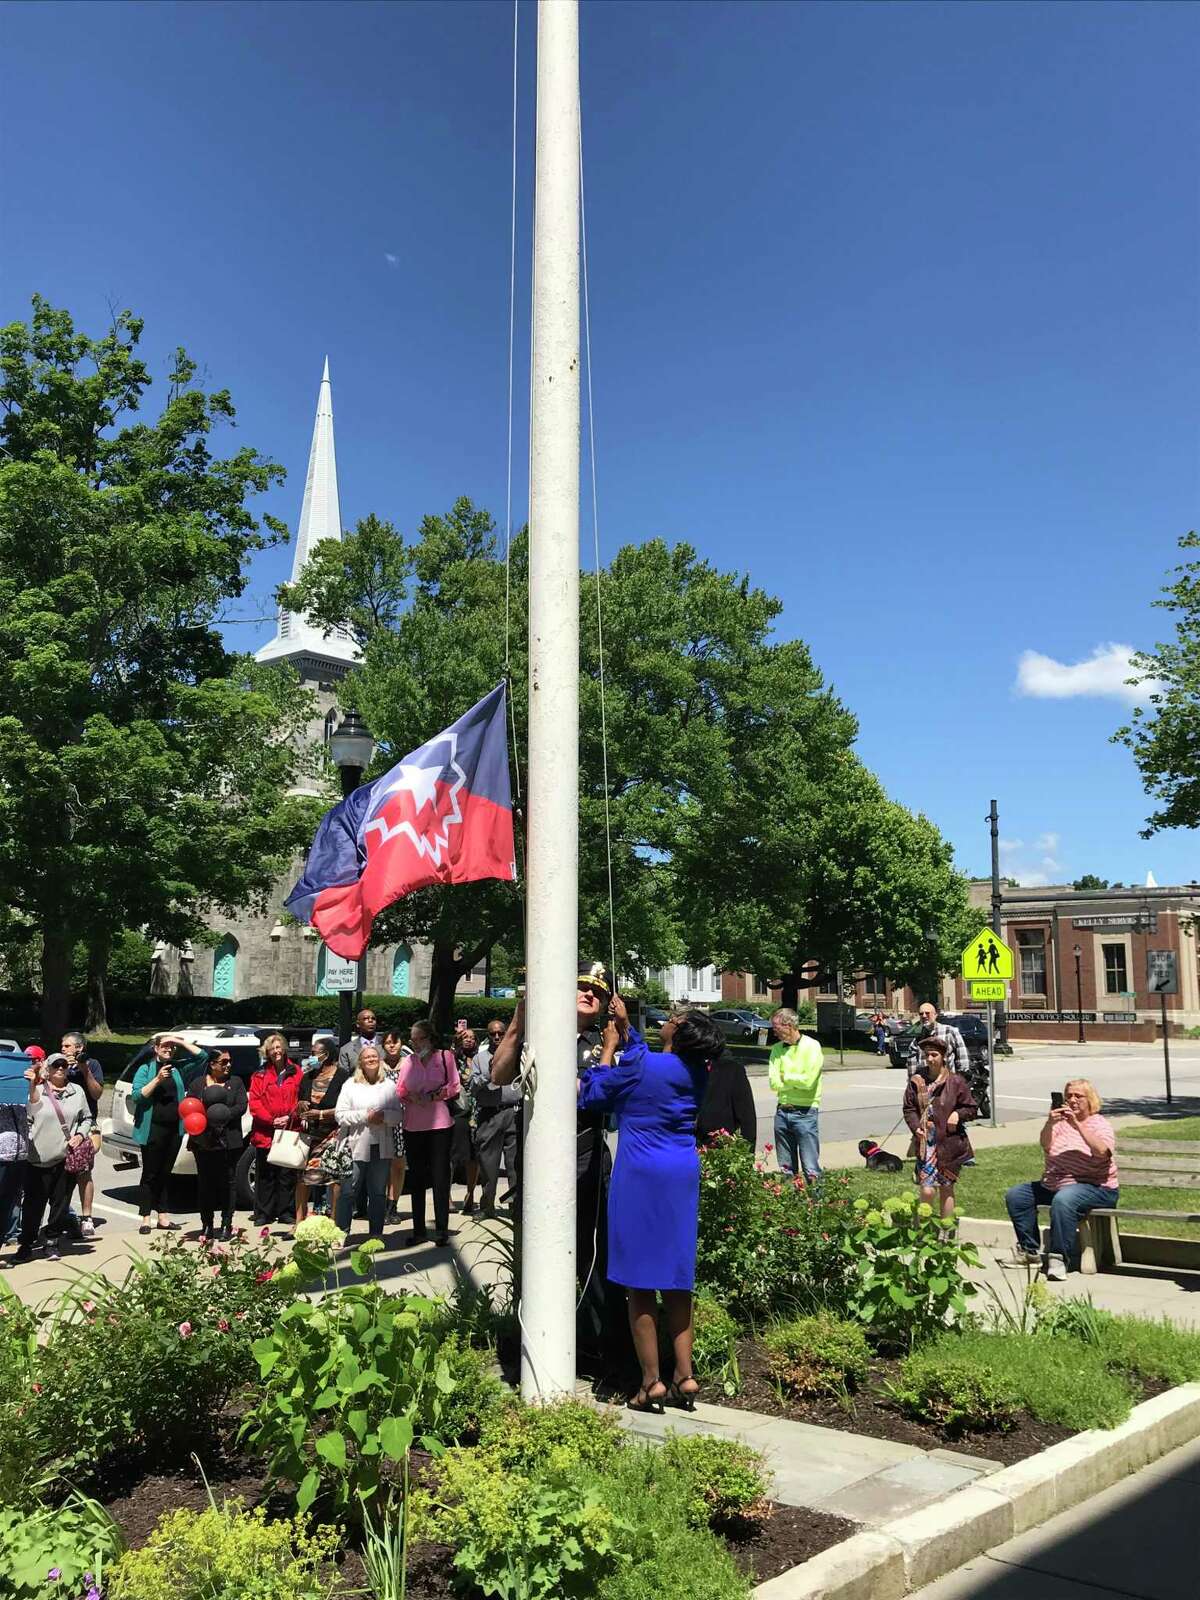 Torrington honored resident Darlene Battle as its 2022 Juneteenth Mayor, with a ceremony on June 19 outside City Hall. Battle and Torrington Police Chief William Baldwin raise the Juneteenth flag during the ceremony.